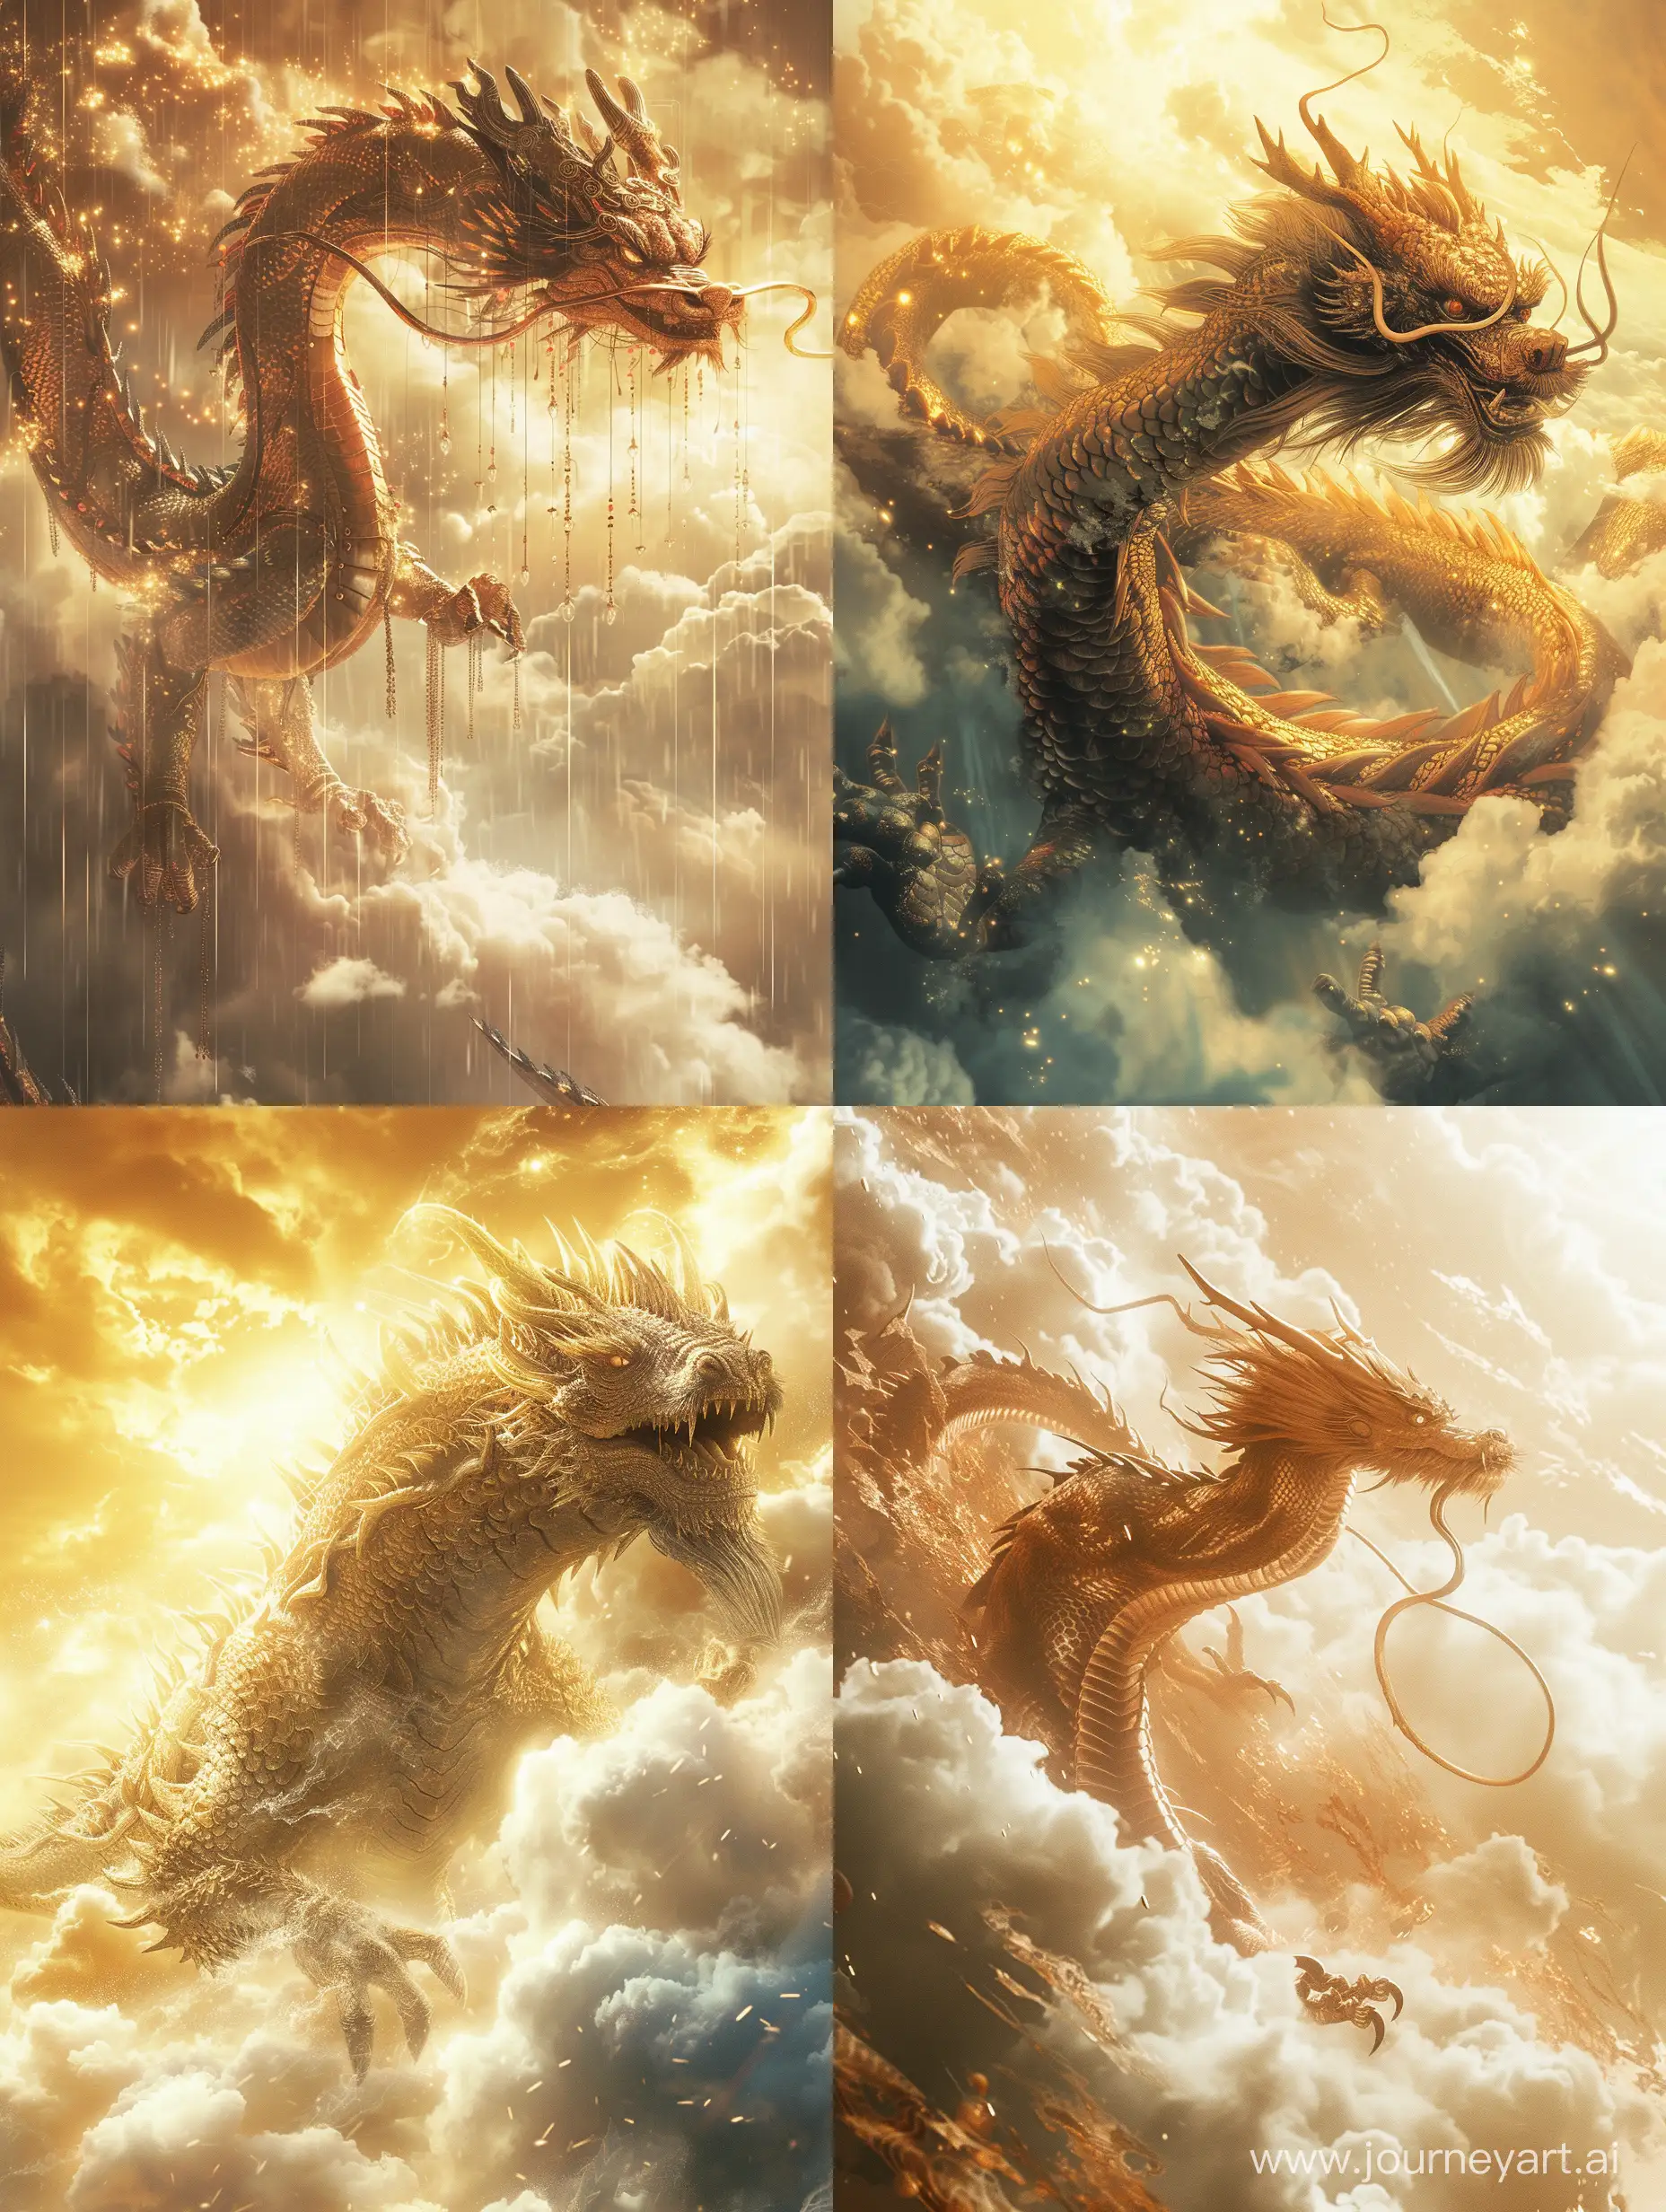 Chinese dragon, a giant dragon cutely walks out from the white gold clouds, the dragon and the background are strong, extreme details, backlighting, cyberpunk